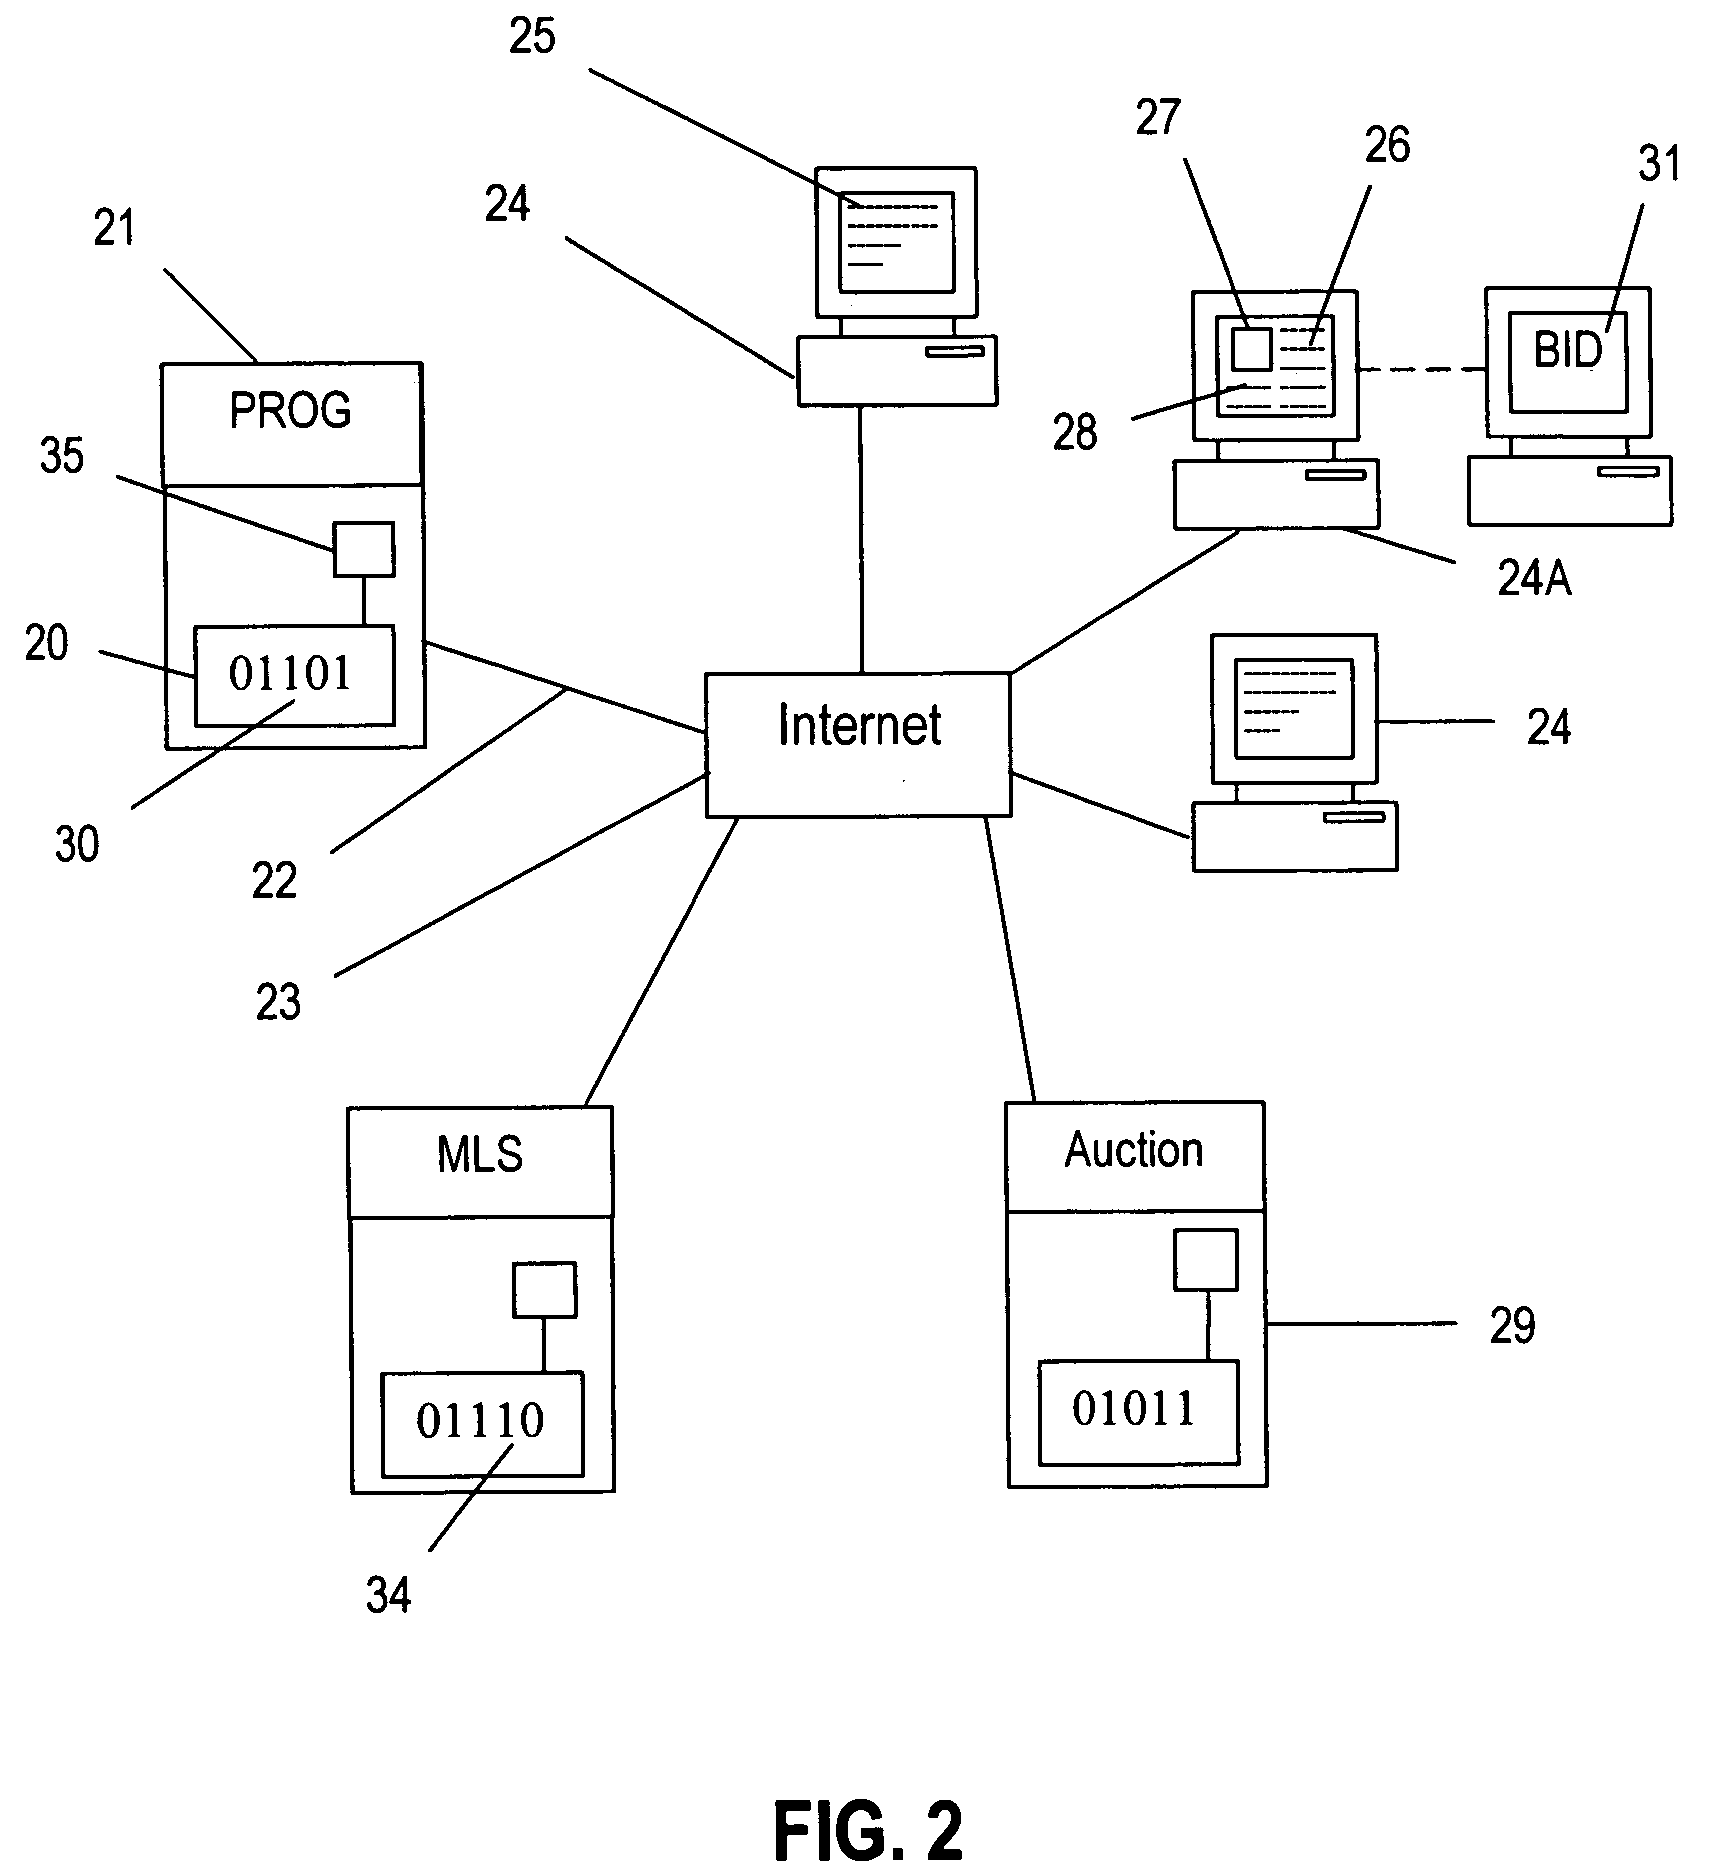 System and method for facilitating a low cost real estate transaction using a Multiple Listing Service (MLS)